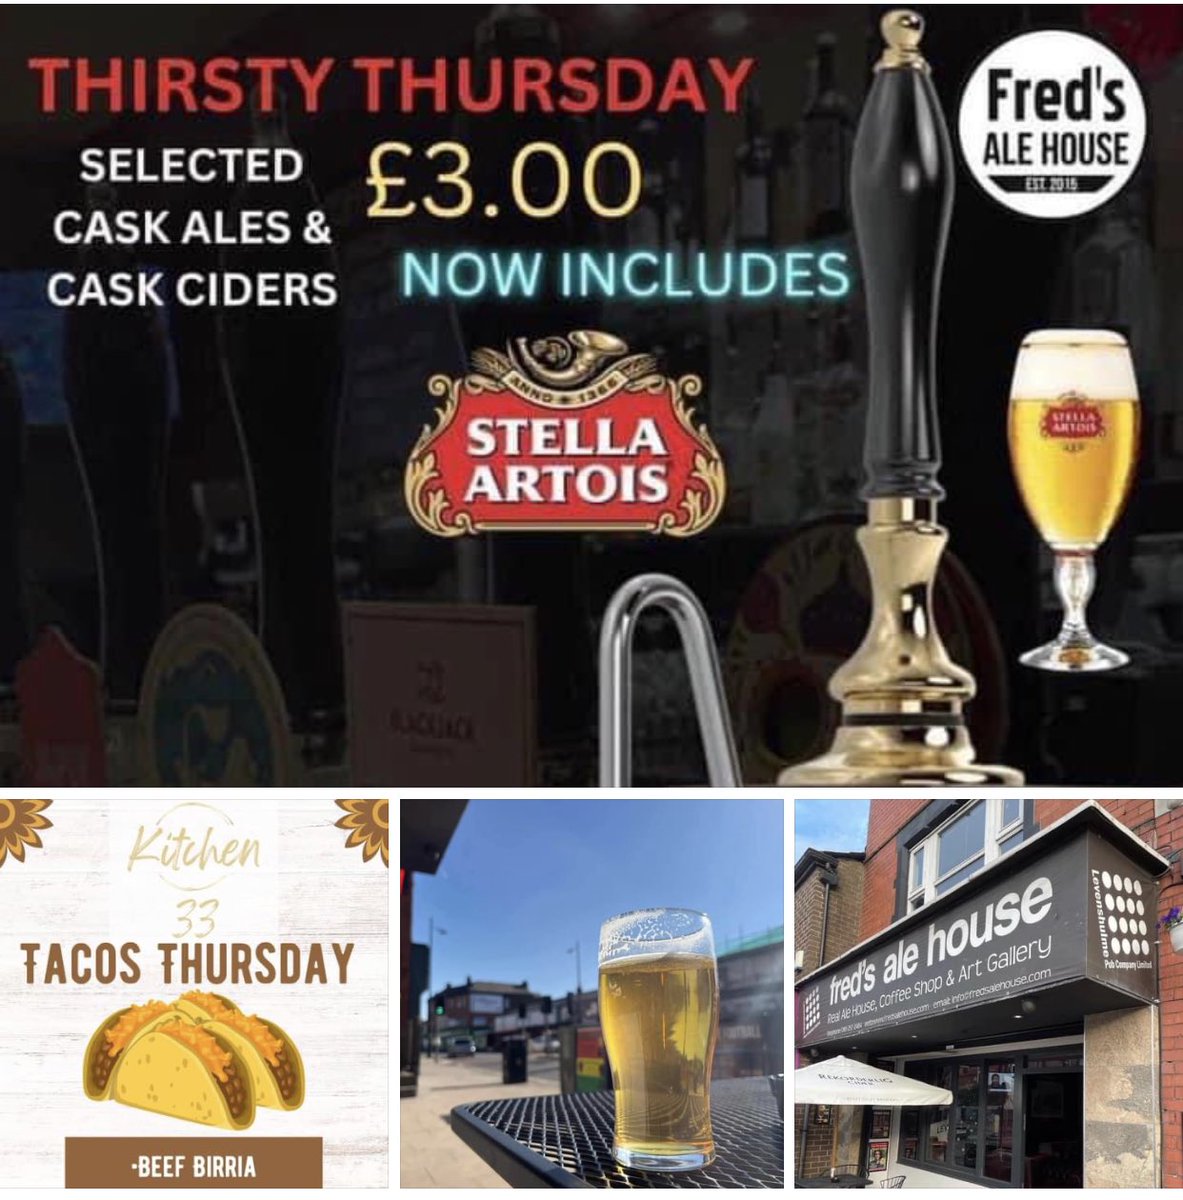 It’s #thirstythursday & #tacothursday tonight in Freds and the sun is out 💚❤️ #caskale #cider #stella just £3 a pint and Tacos from Kitchen 33 or 3 for £5  - RT to show the love